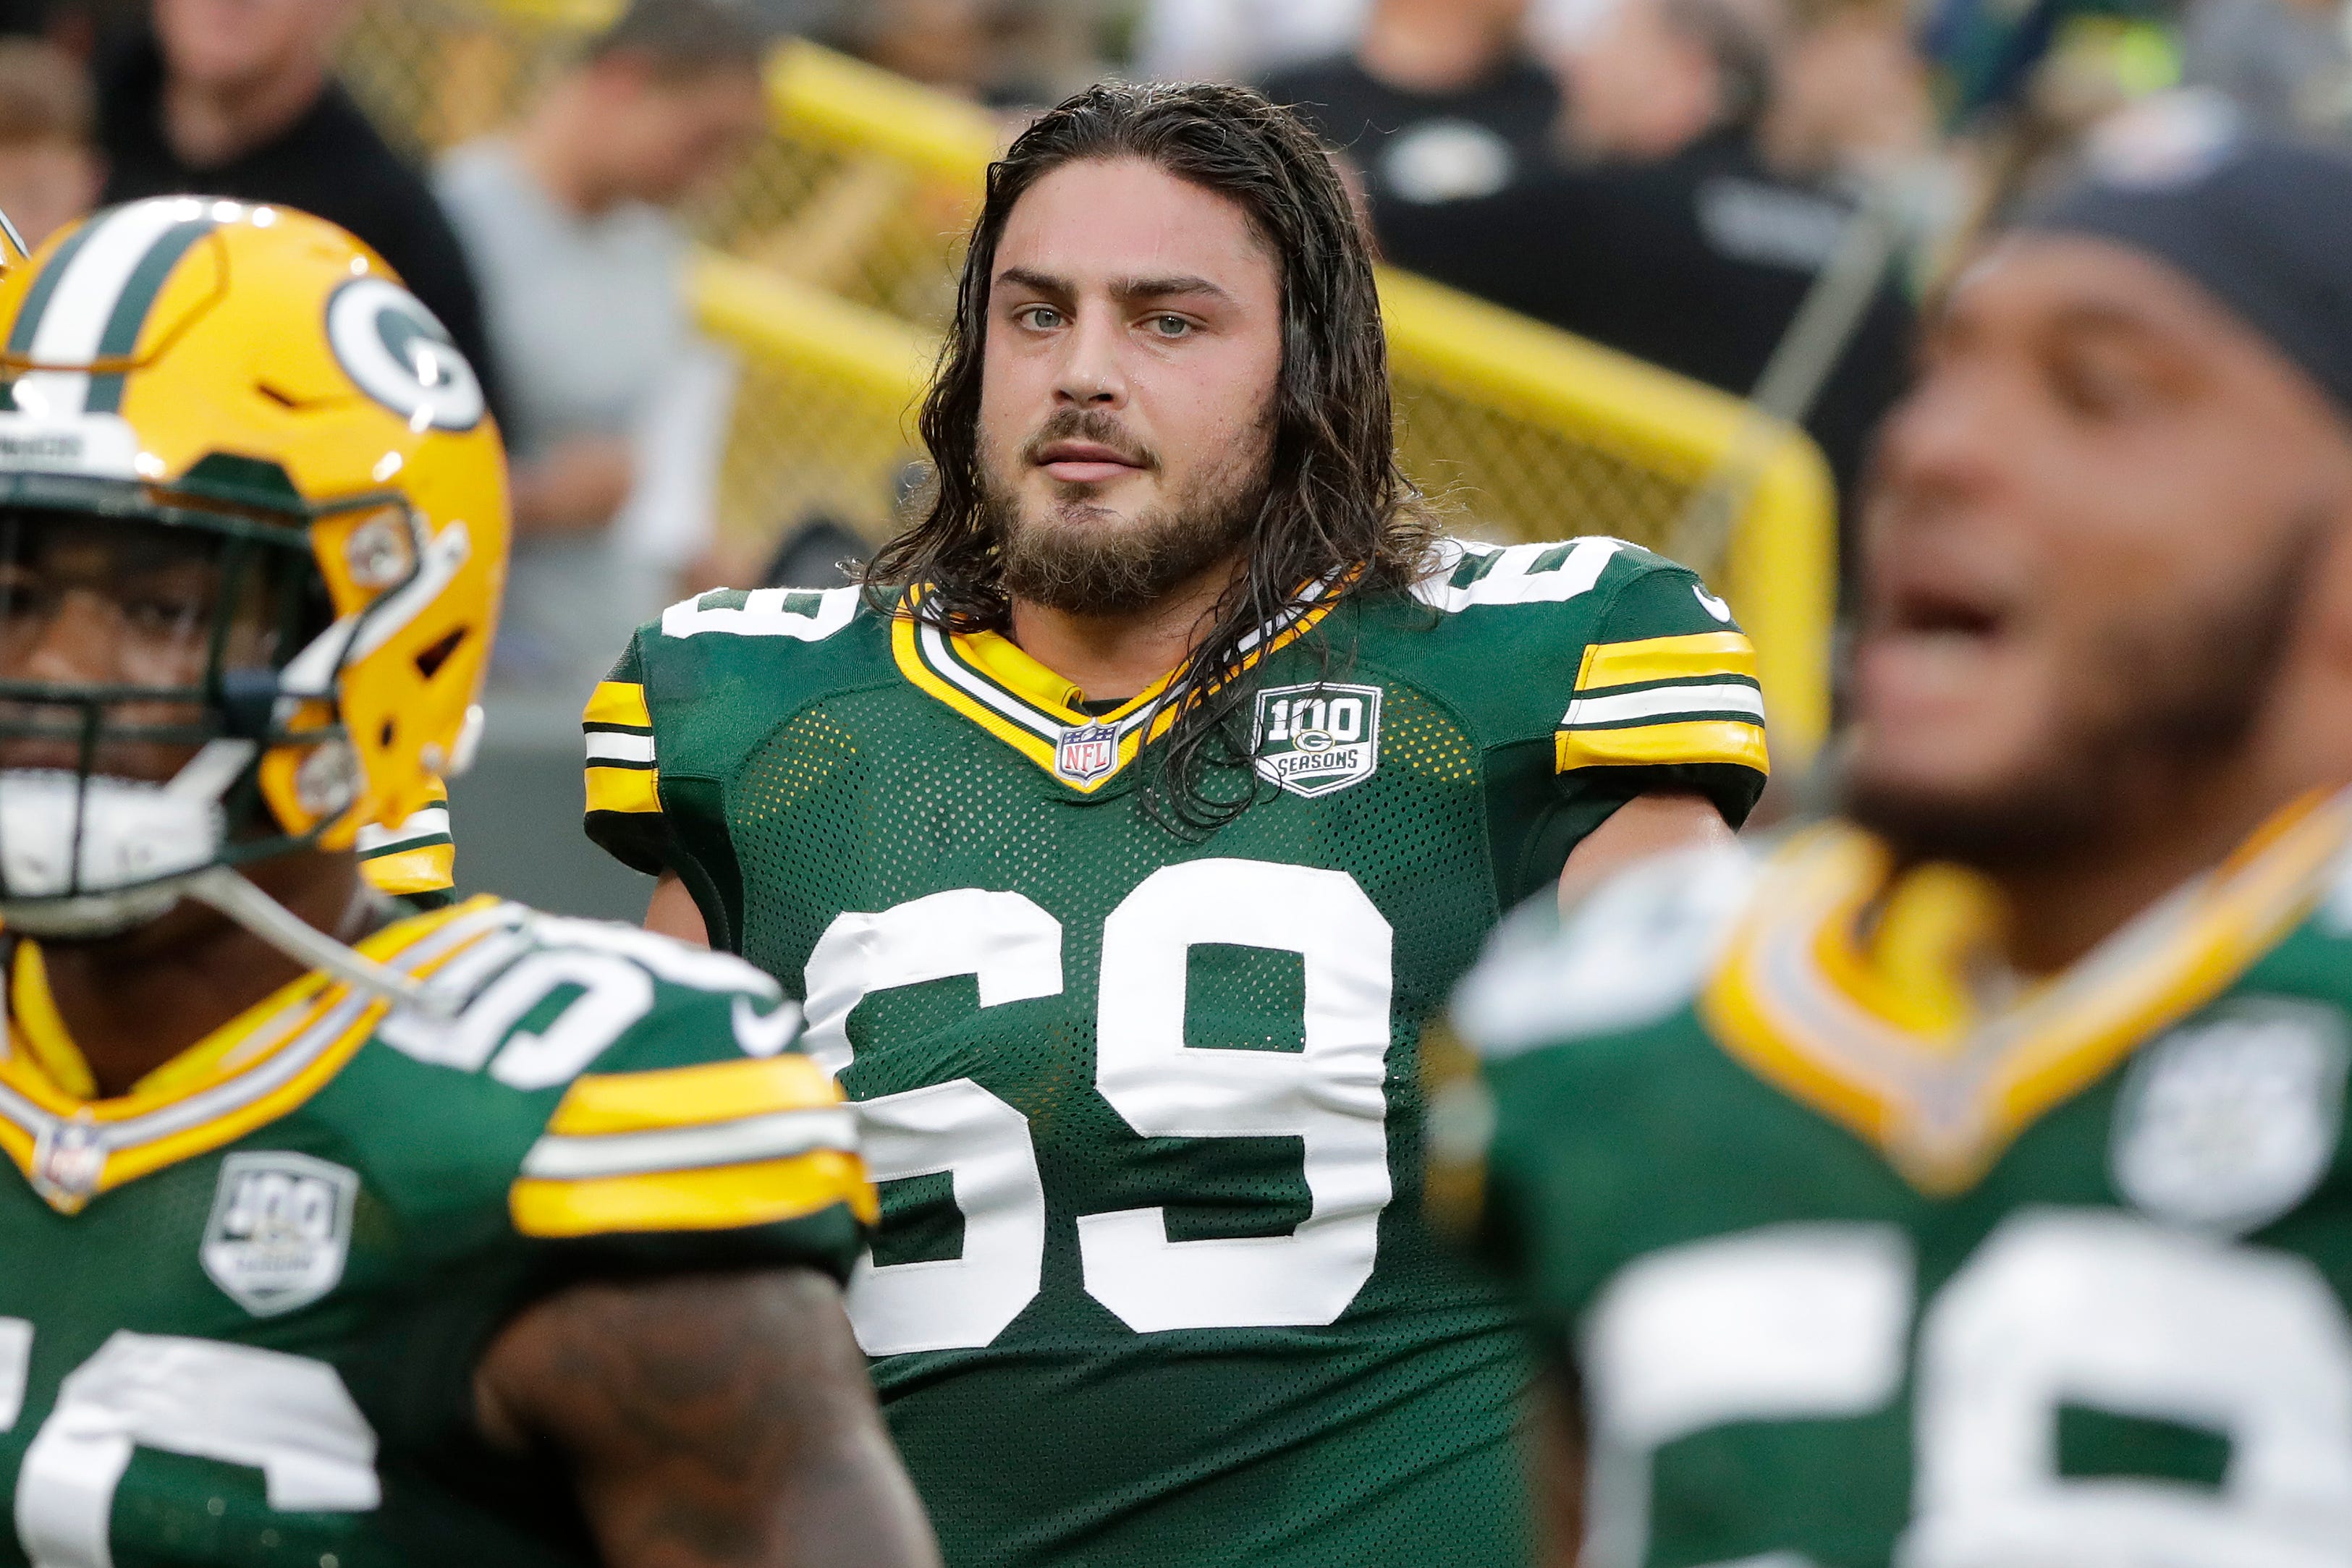 Green Bay Packers offensive tackle David Bakhtiari (69) walks off the field after warmups before an NFL preseason game at Lambeau Field on Thursday, August 16, 2018 in Green Bay, Wis.